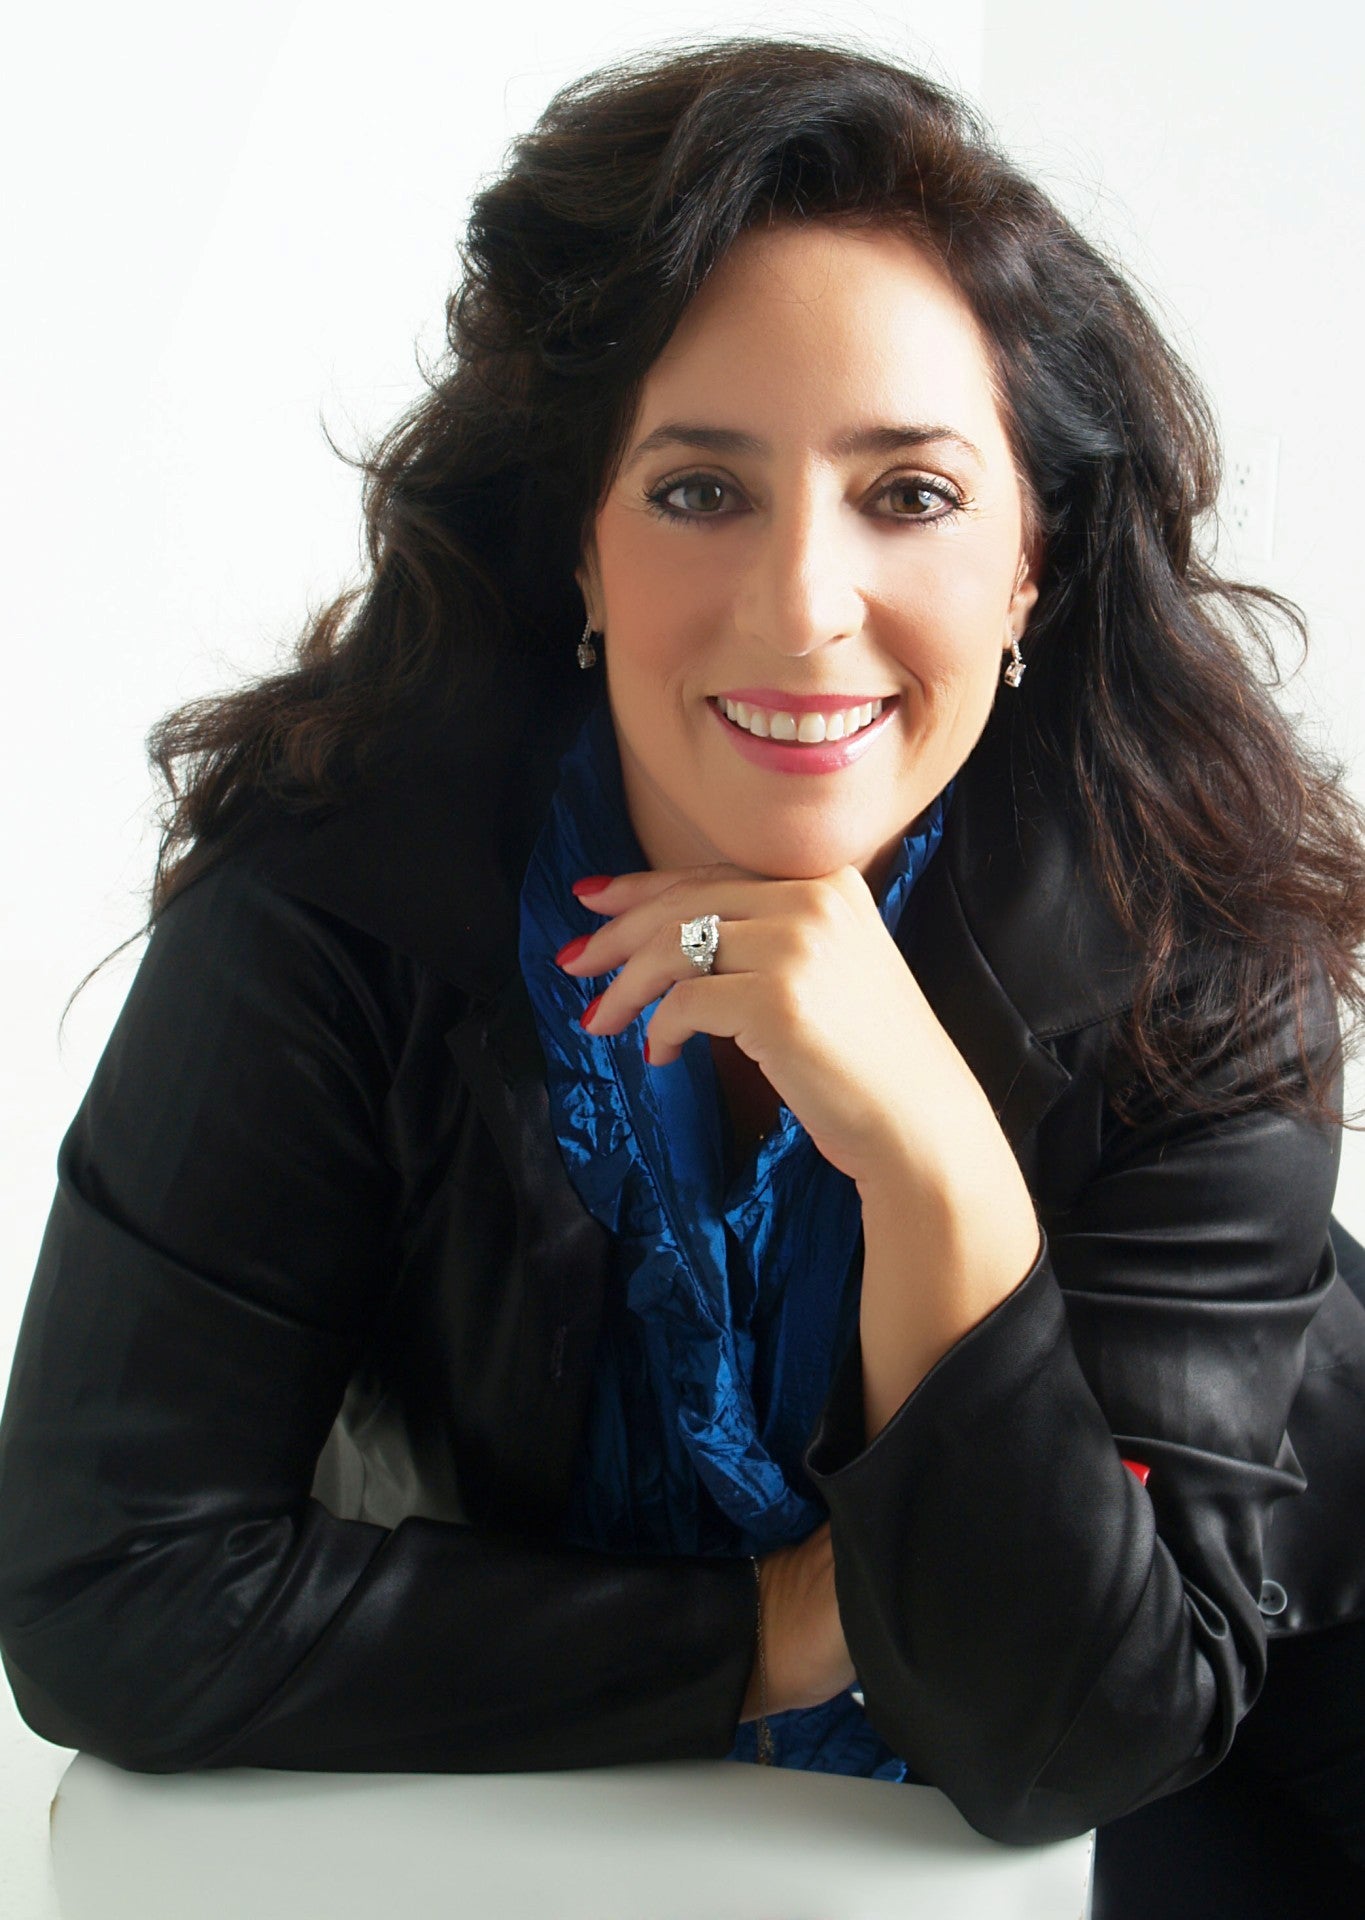 Debra Zafiropoulos, Founder of National Cancer Network Image